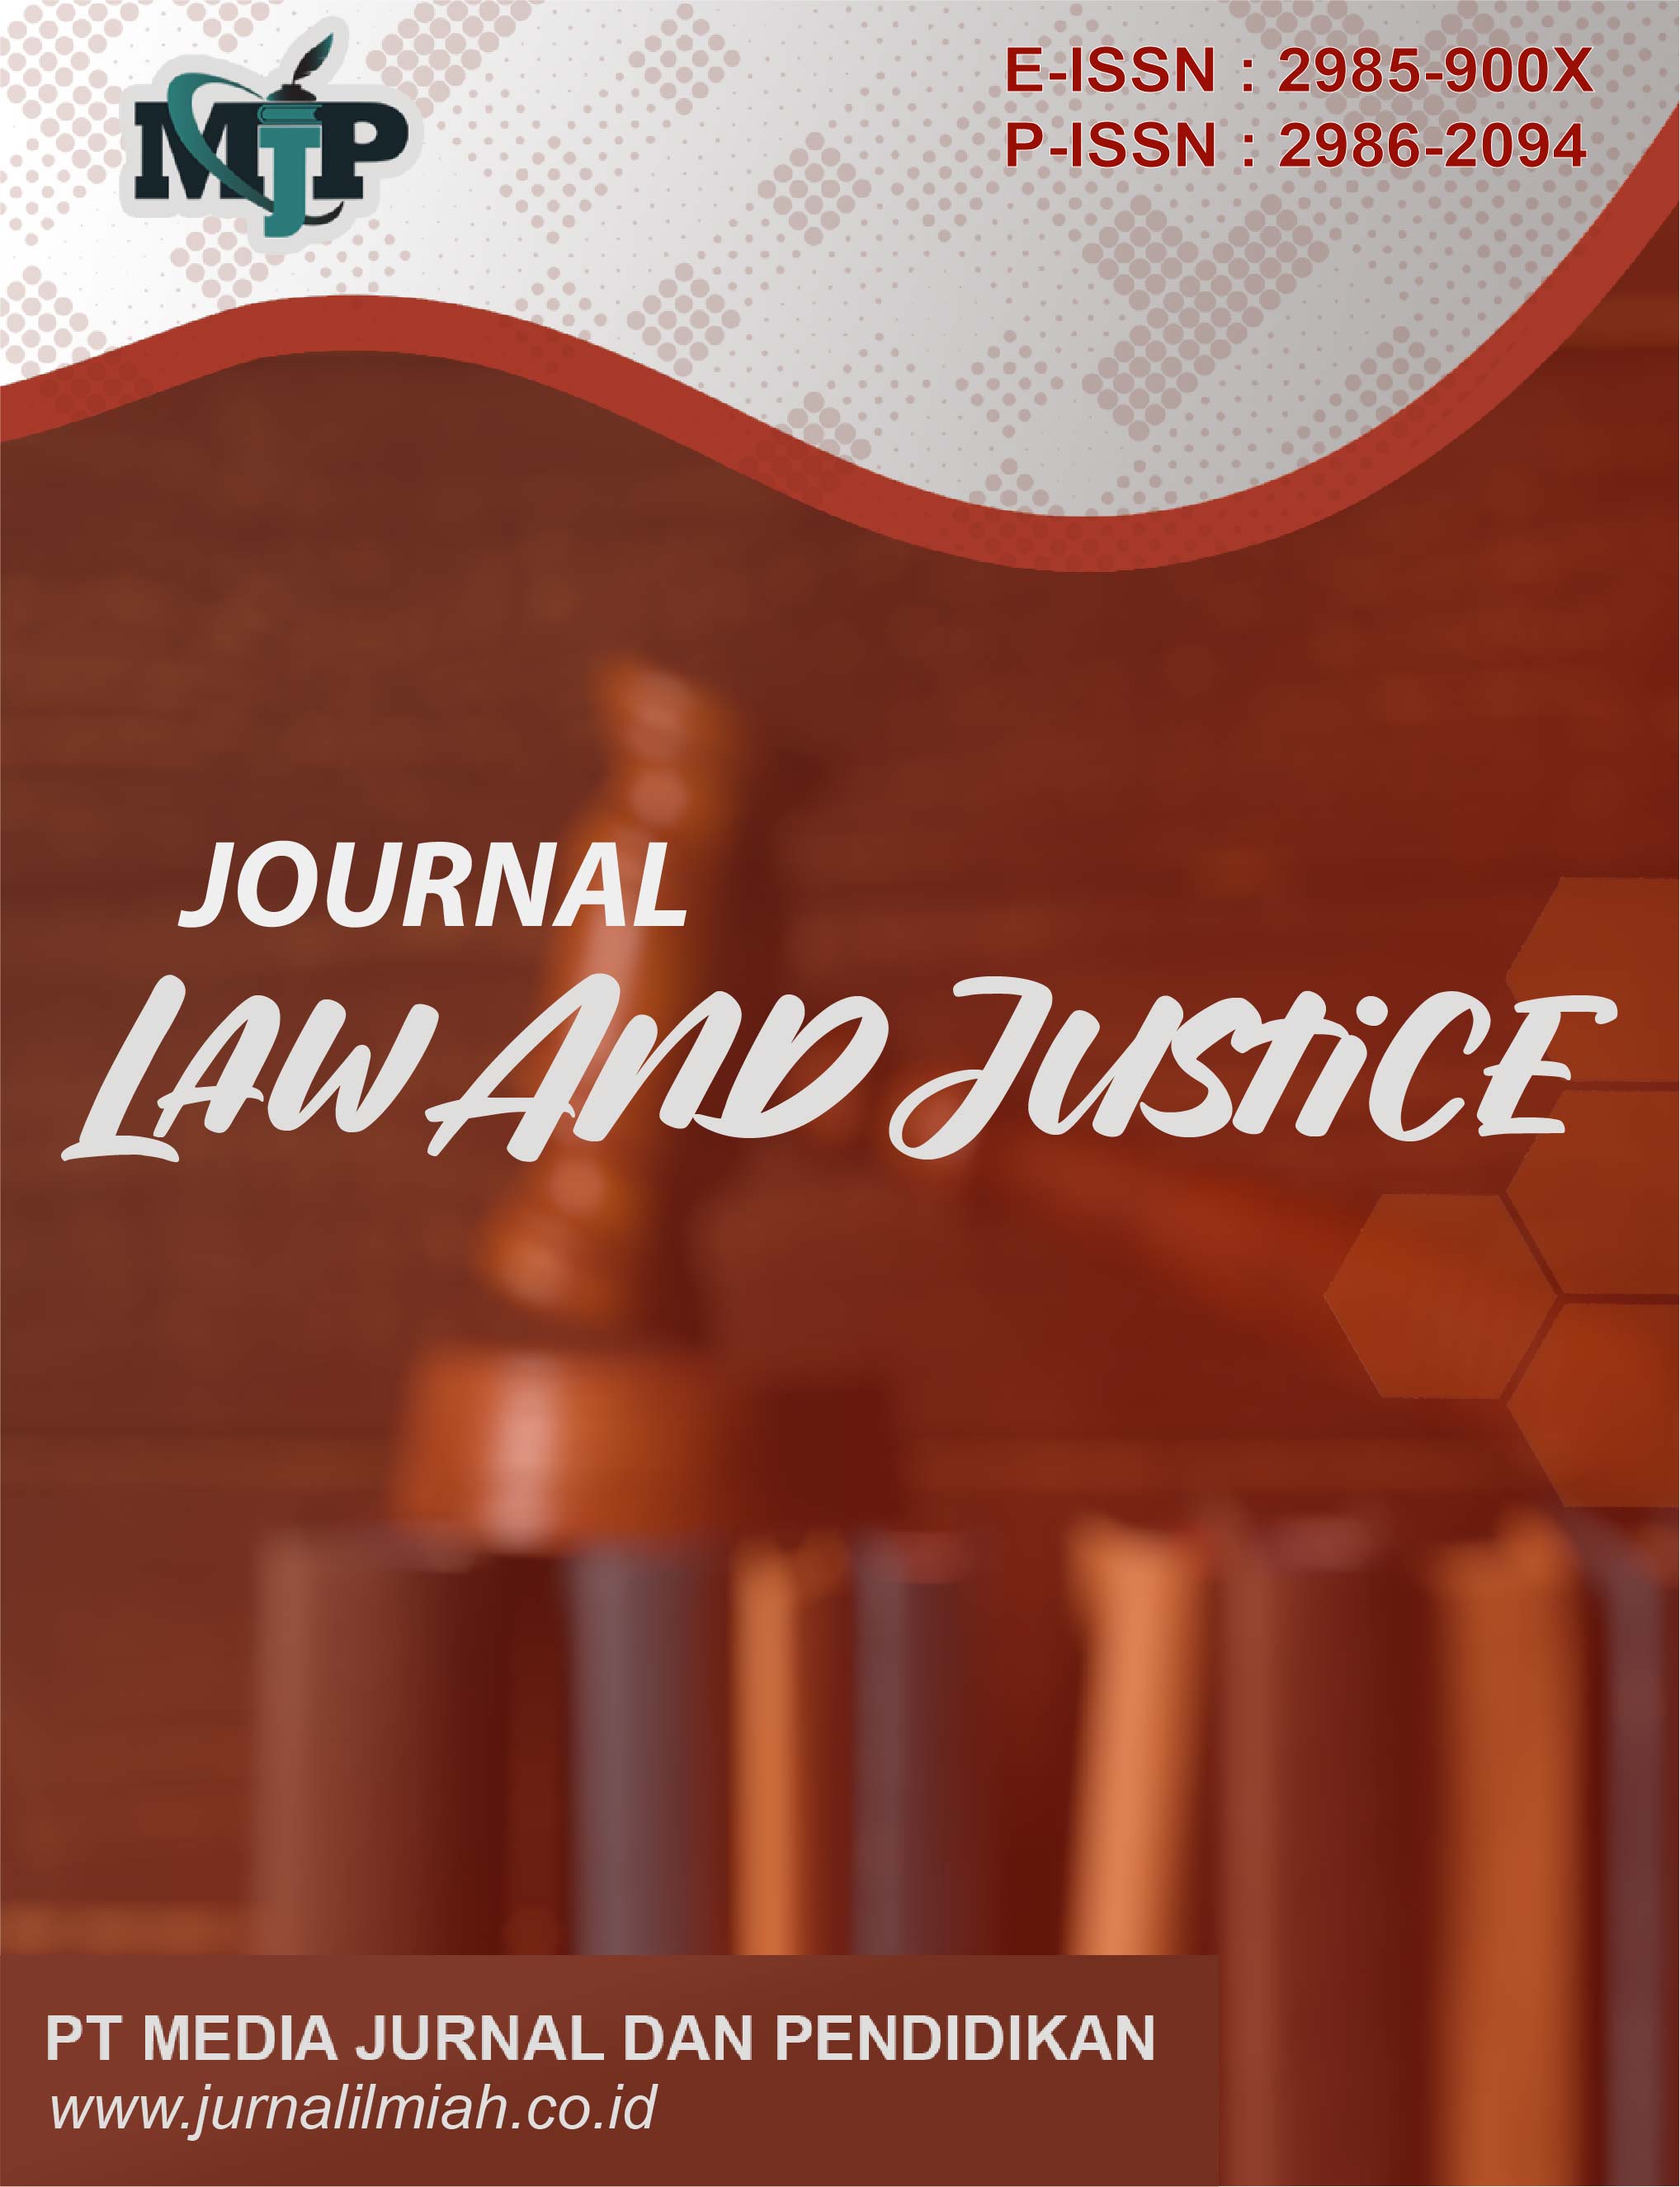 mjp journal law and justice